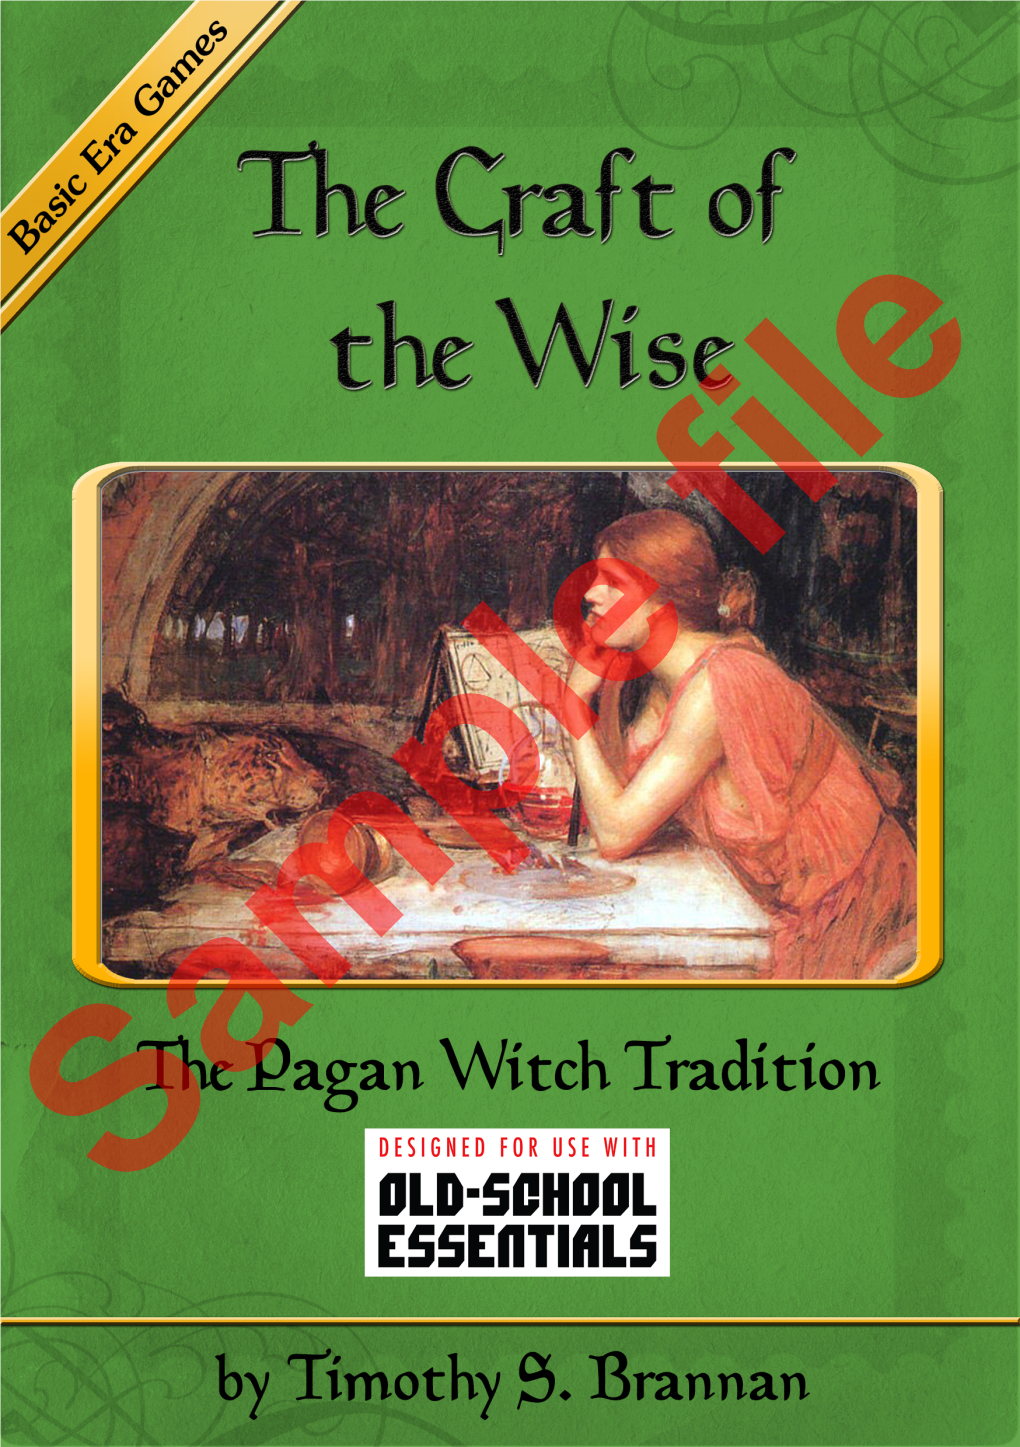 The Creaft of the Wise the Page Witch Tradition